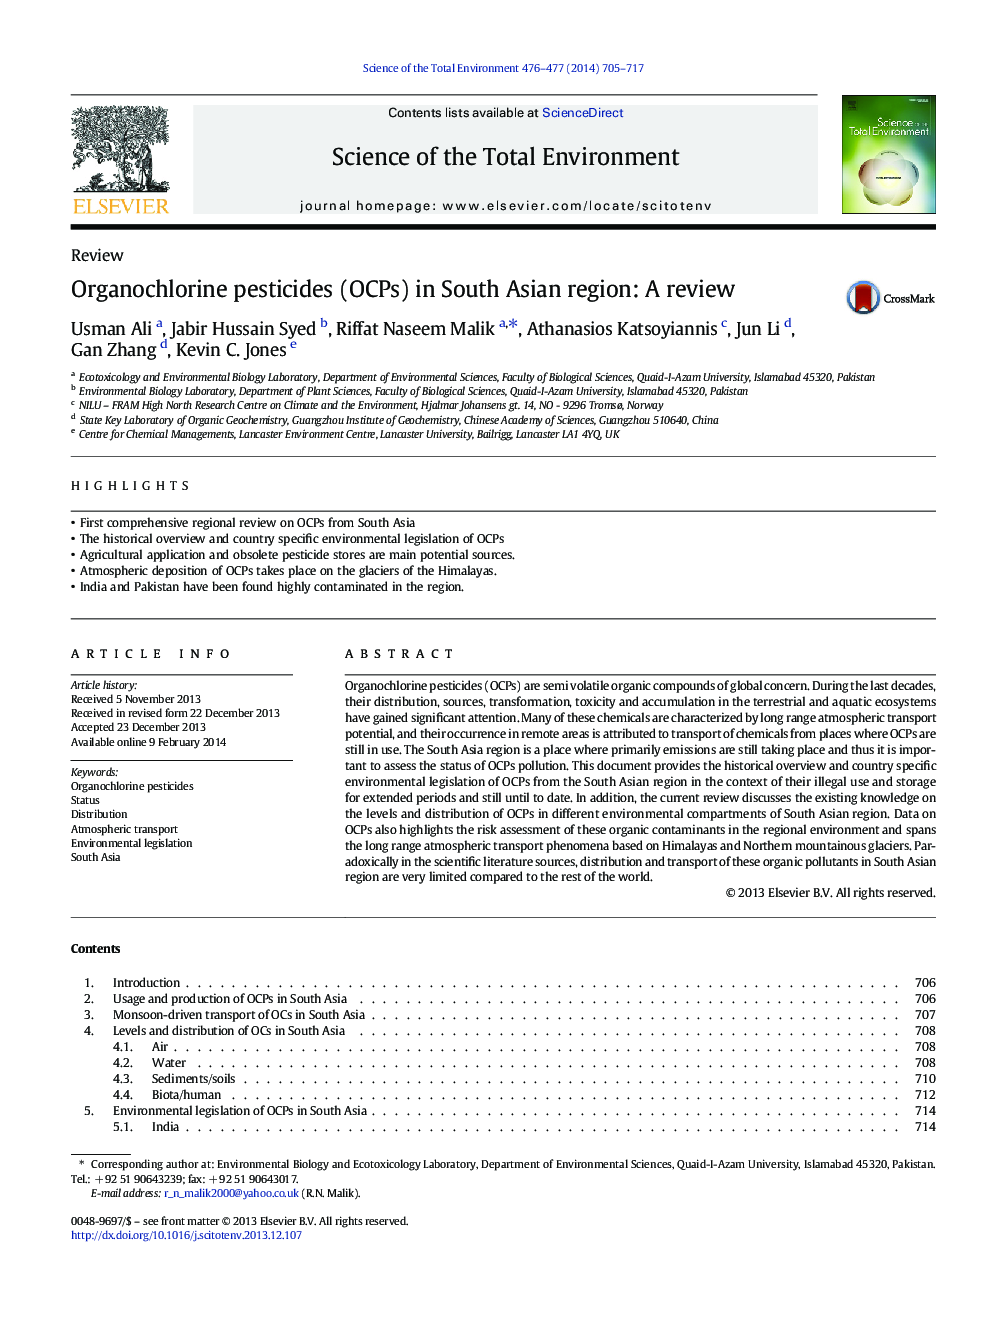 Organochlorine pesticides (OCPs) in South Asian region: A review